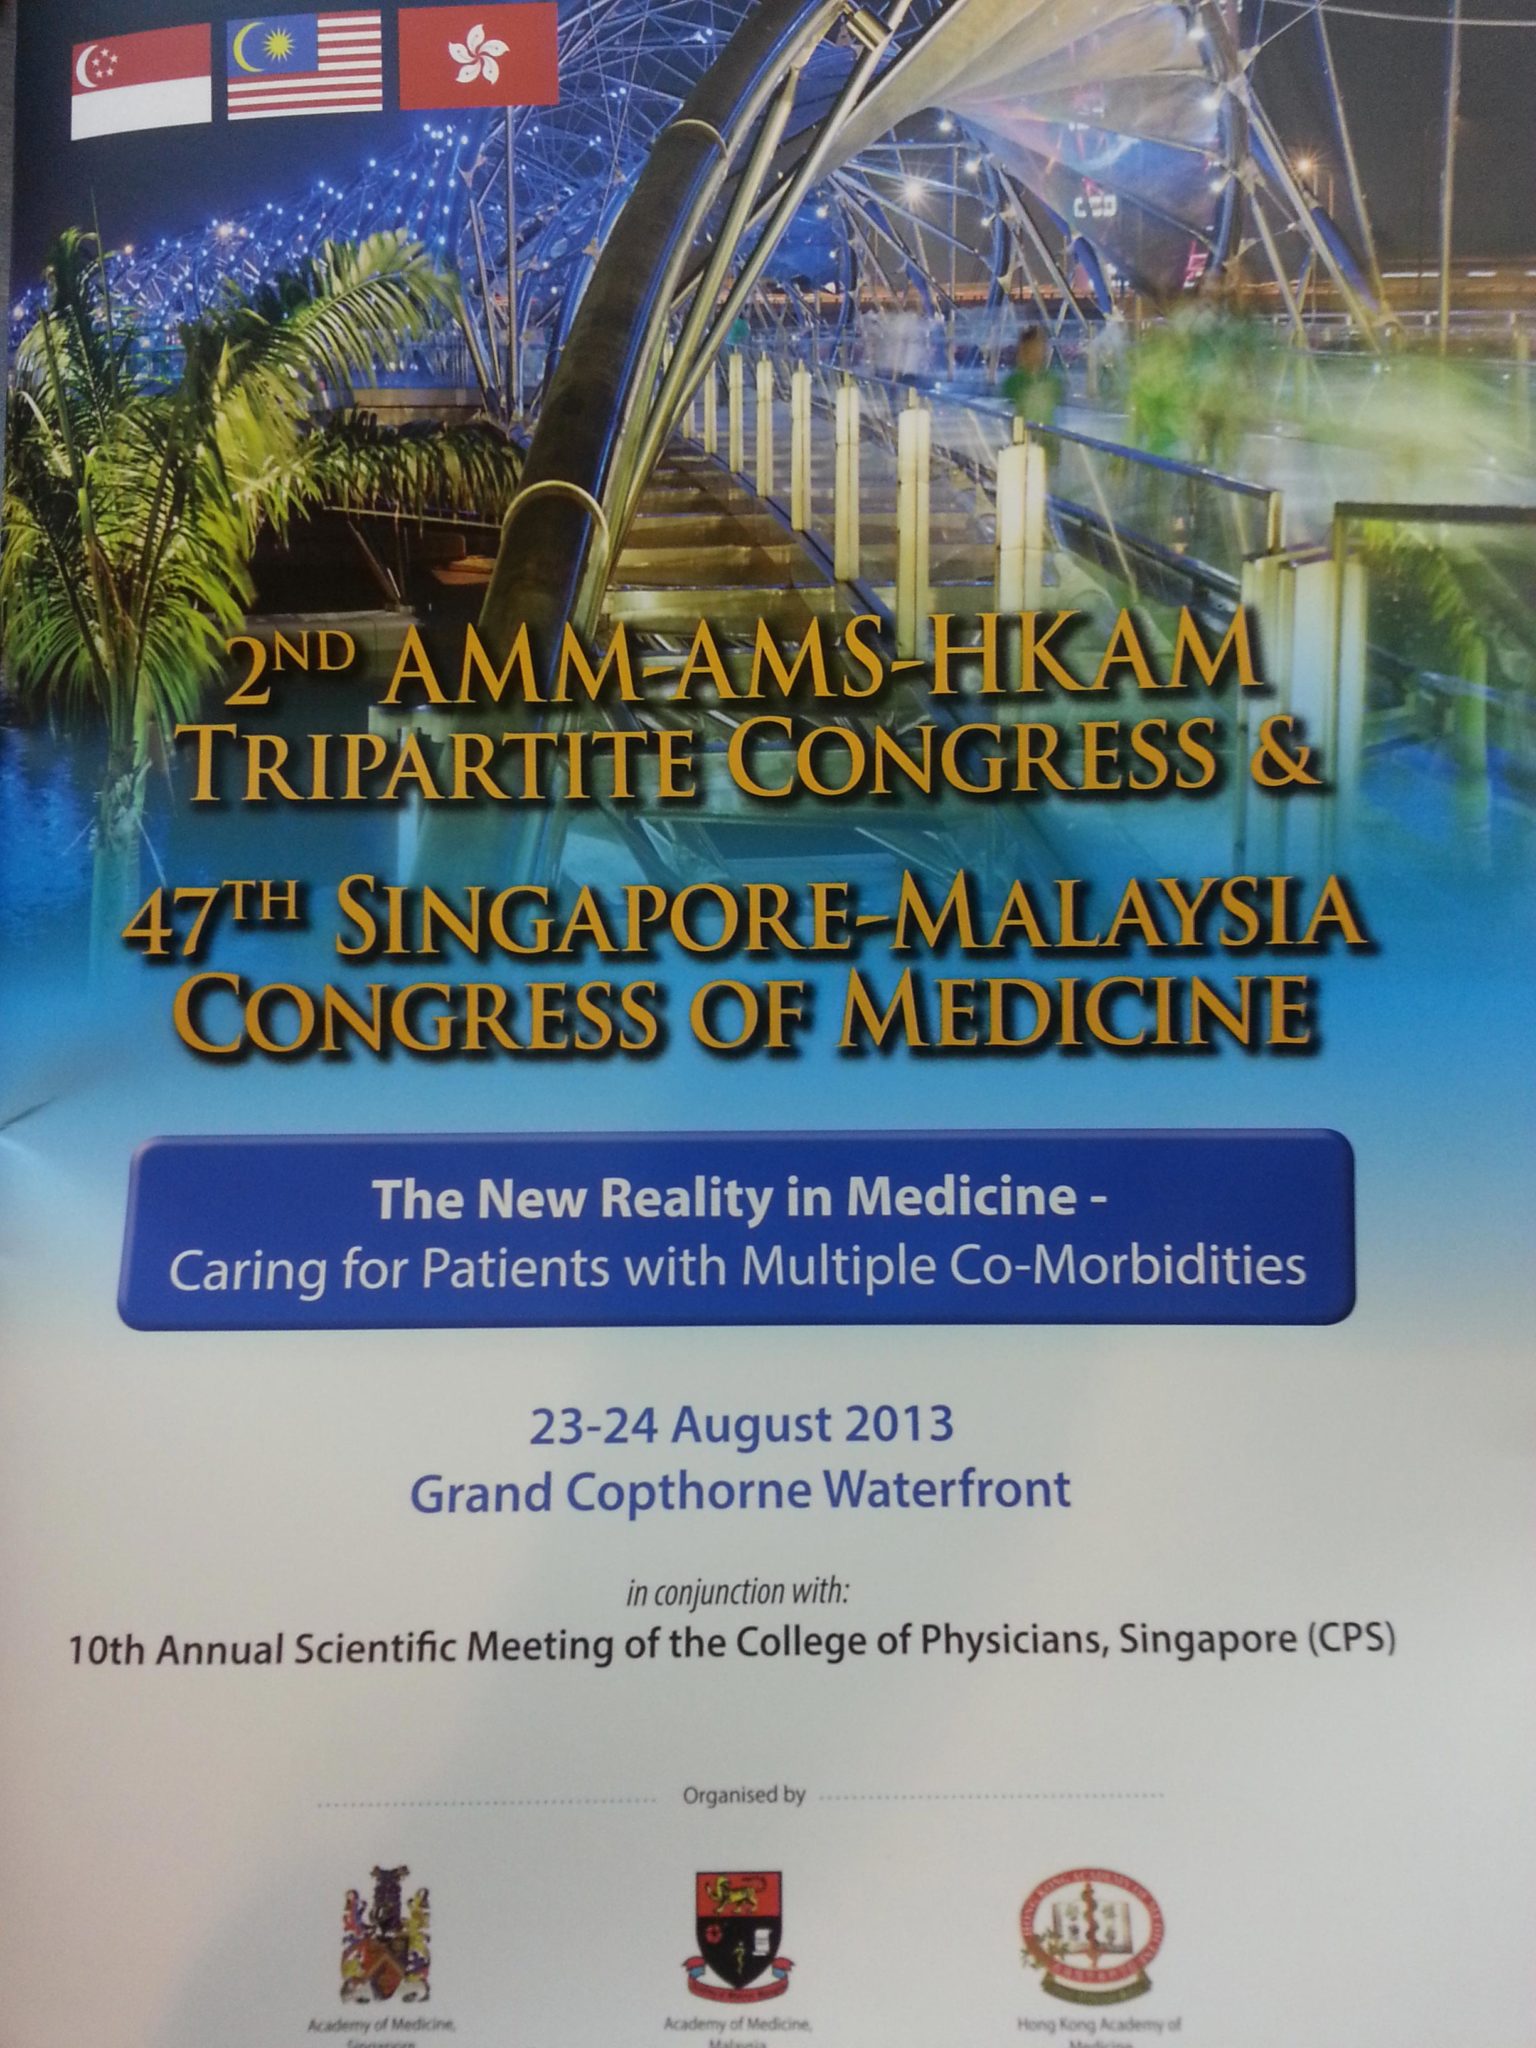 23-24 August 2013: 2nd AMM-AMS-HKAM Tripartite Congress & 47th Singapore-Malaysia Congress of Medicine at Grand Copthorne Waterfront, Singapore